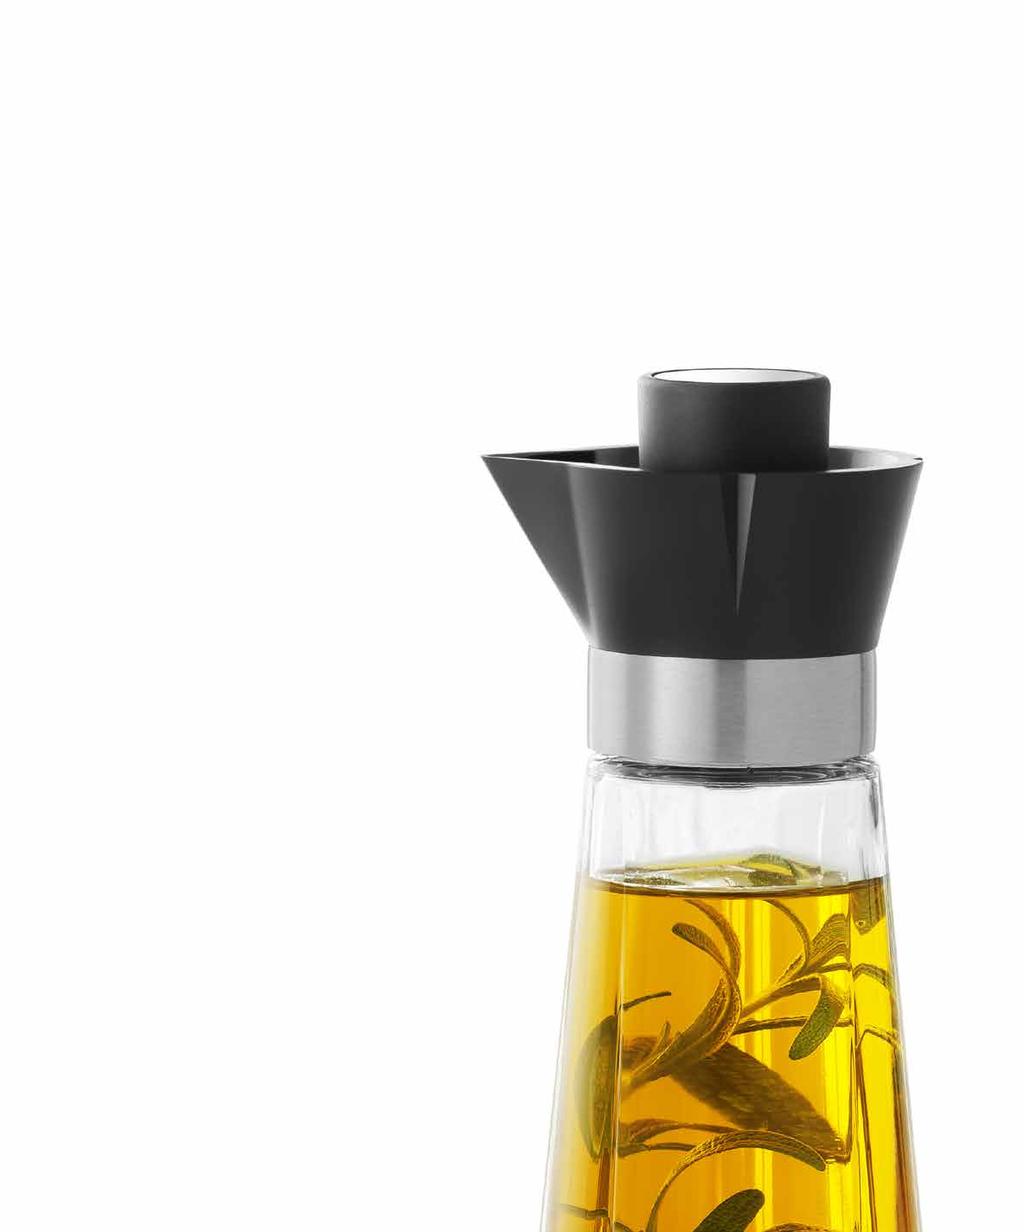 For GOLDEN DROPS Never compromise on the quality of your olive oil.